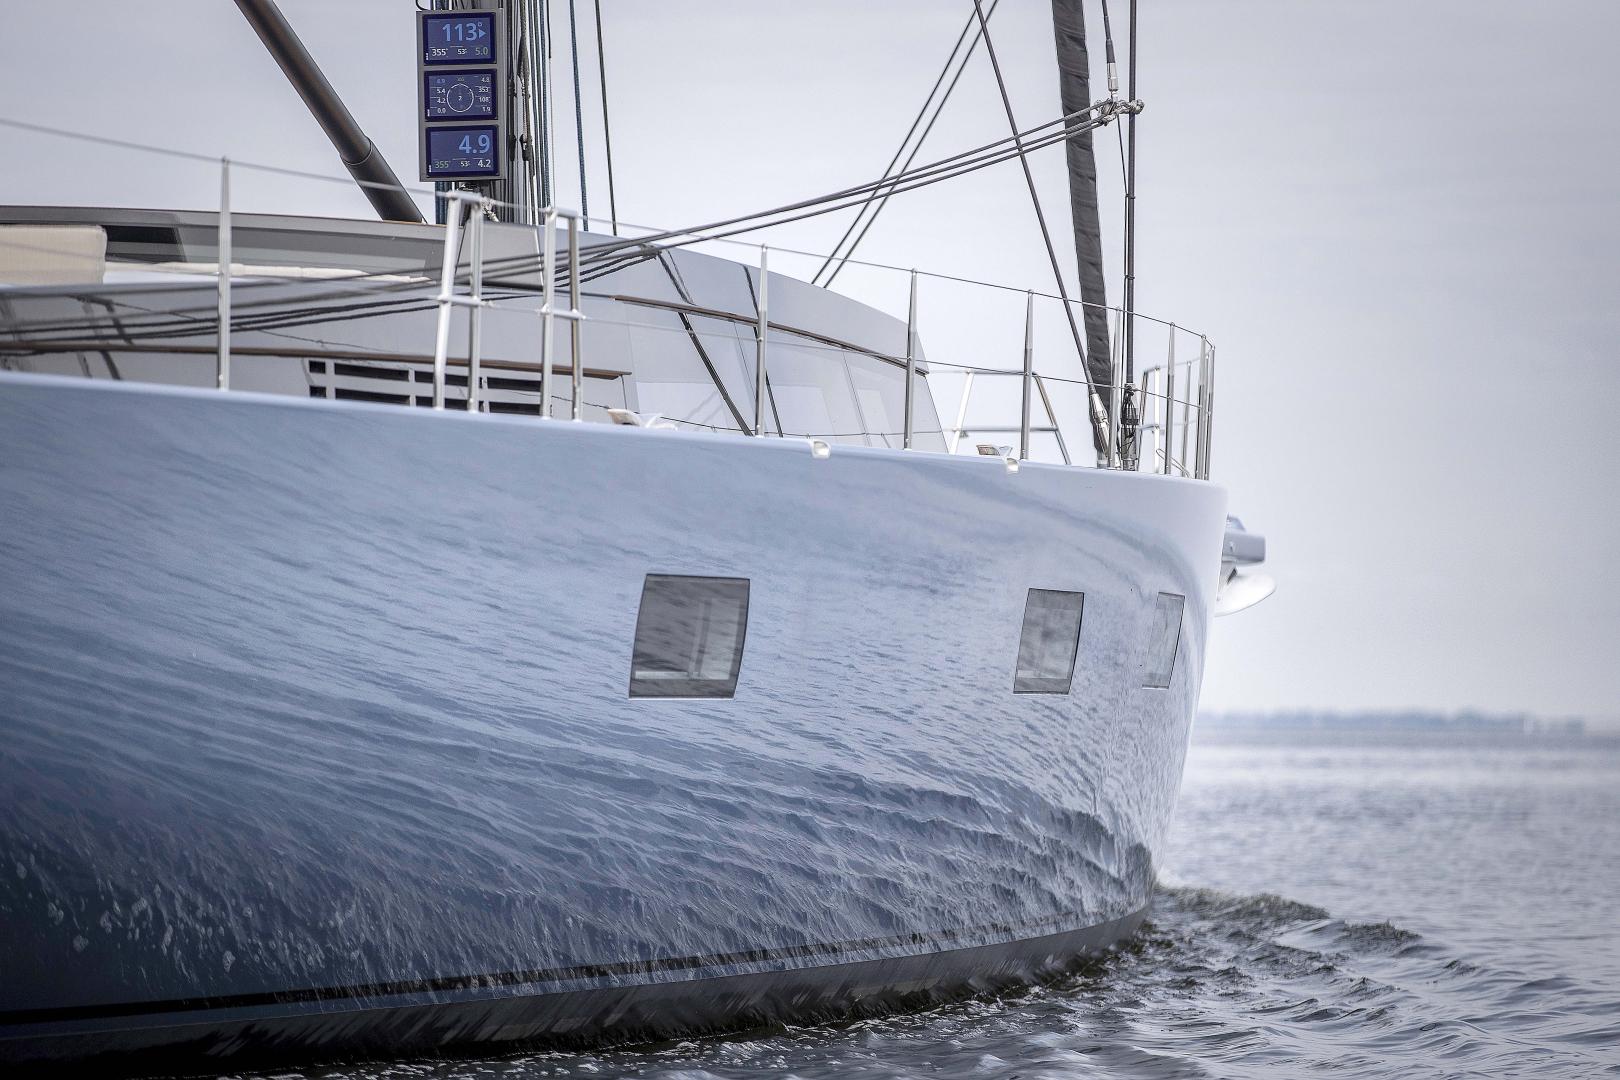 Yyachts launches 90-foot slup, one of the biggest sailing yachts